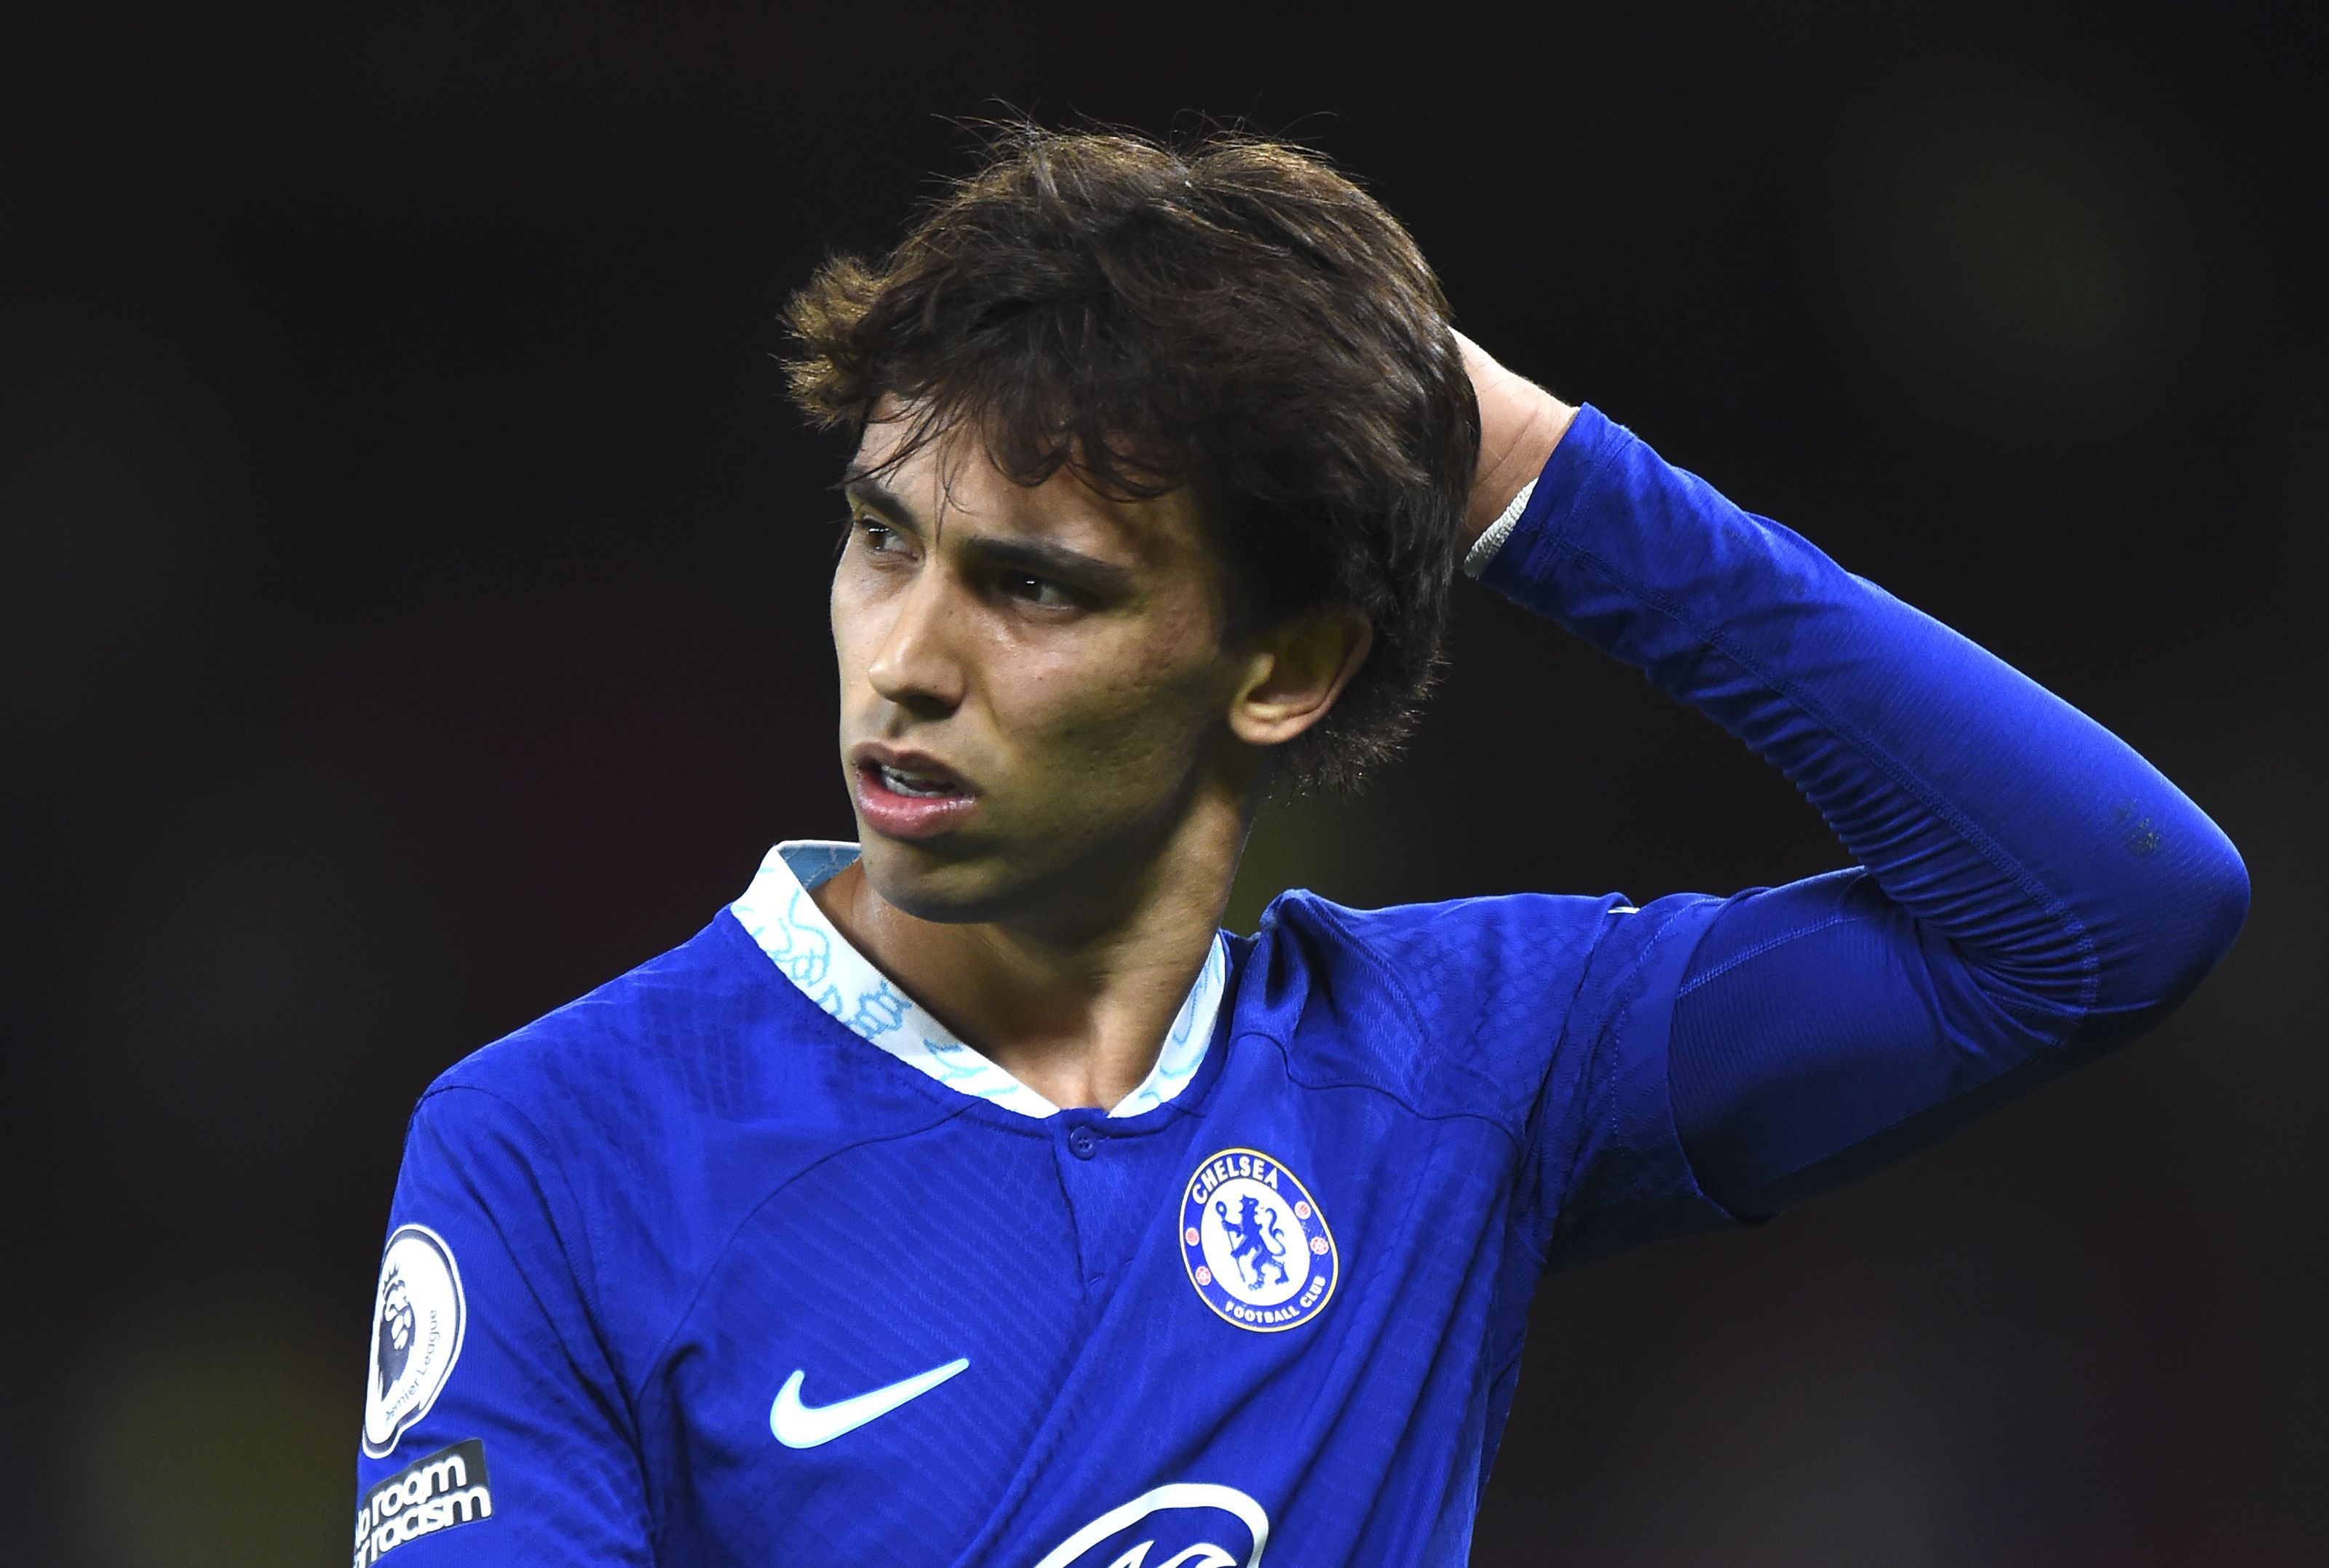 Manchester (United Kingdom), 25/05/2023.- Joao Felix of Chelsea reacts after loosing the English Premier League soccer match between Manchester United and Chelsea FC, in Manchester, Britain, 25 May 2023. (Reino Unido) EFE/EPA/PETER POWELL EDITORIAL USE ONLY. No use with unauthorized audio, video, data, fixture lists, club/league logos or 'live' services. Online in-match use limited to 120 images, no video emulation. No use in betting, games or single club/league/player publications.